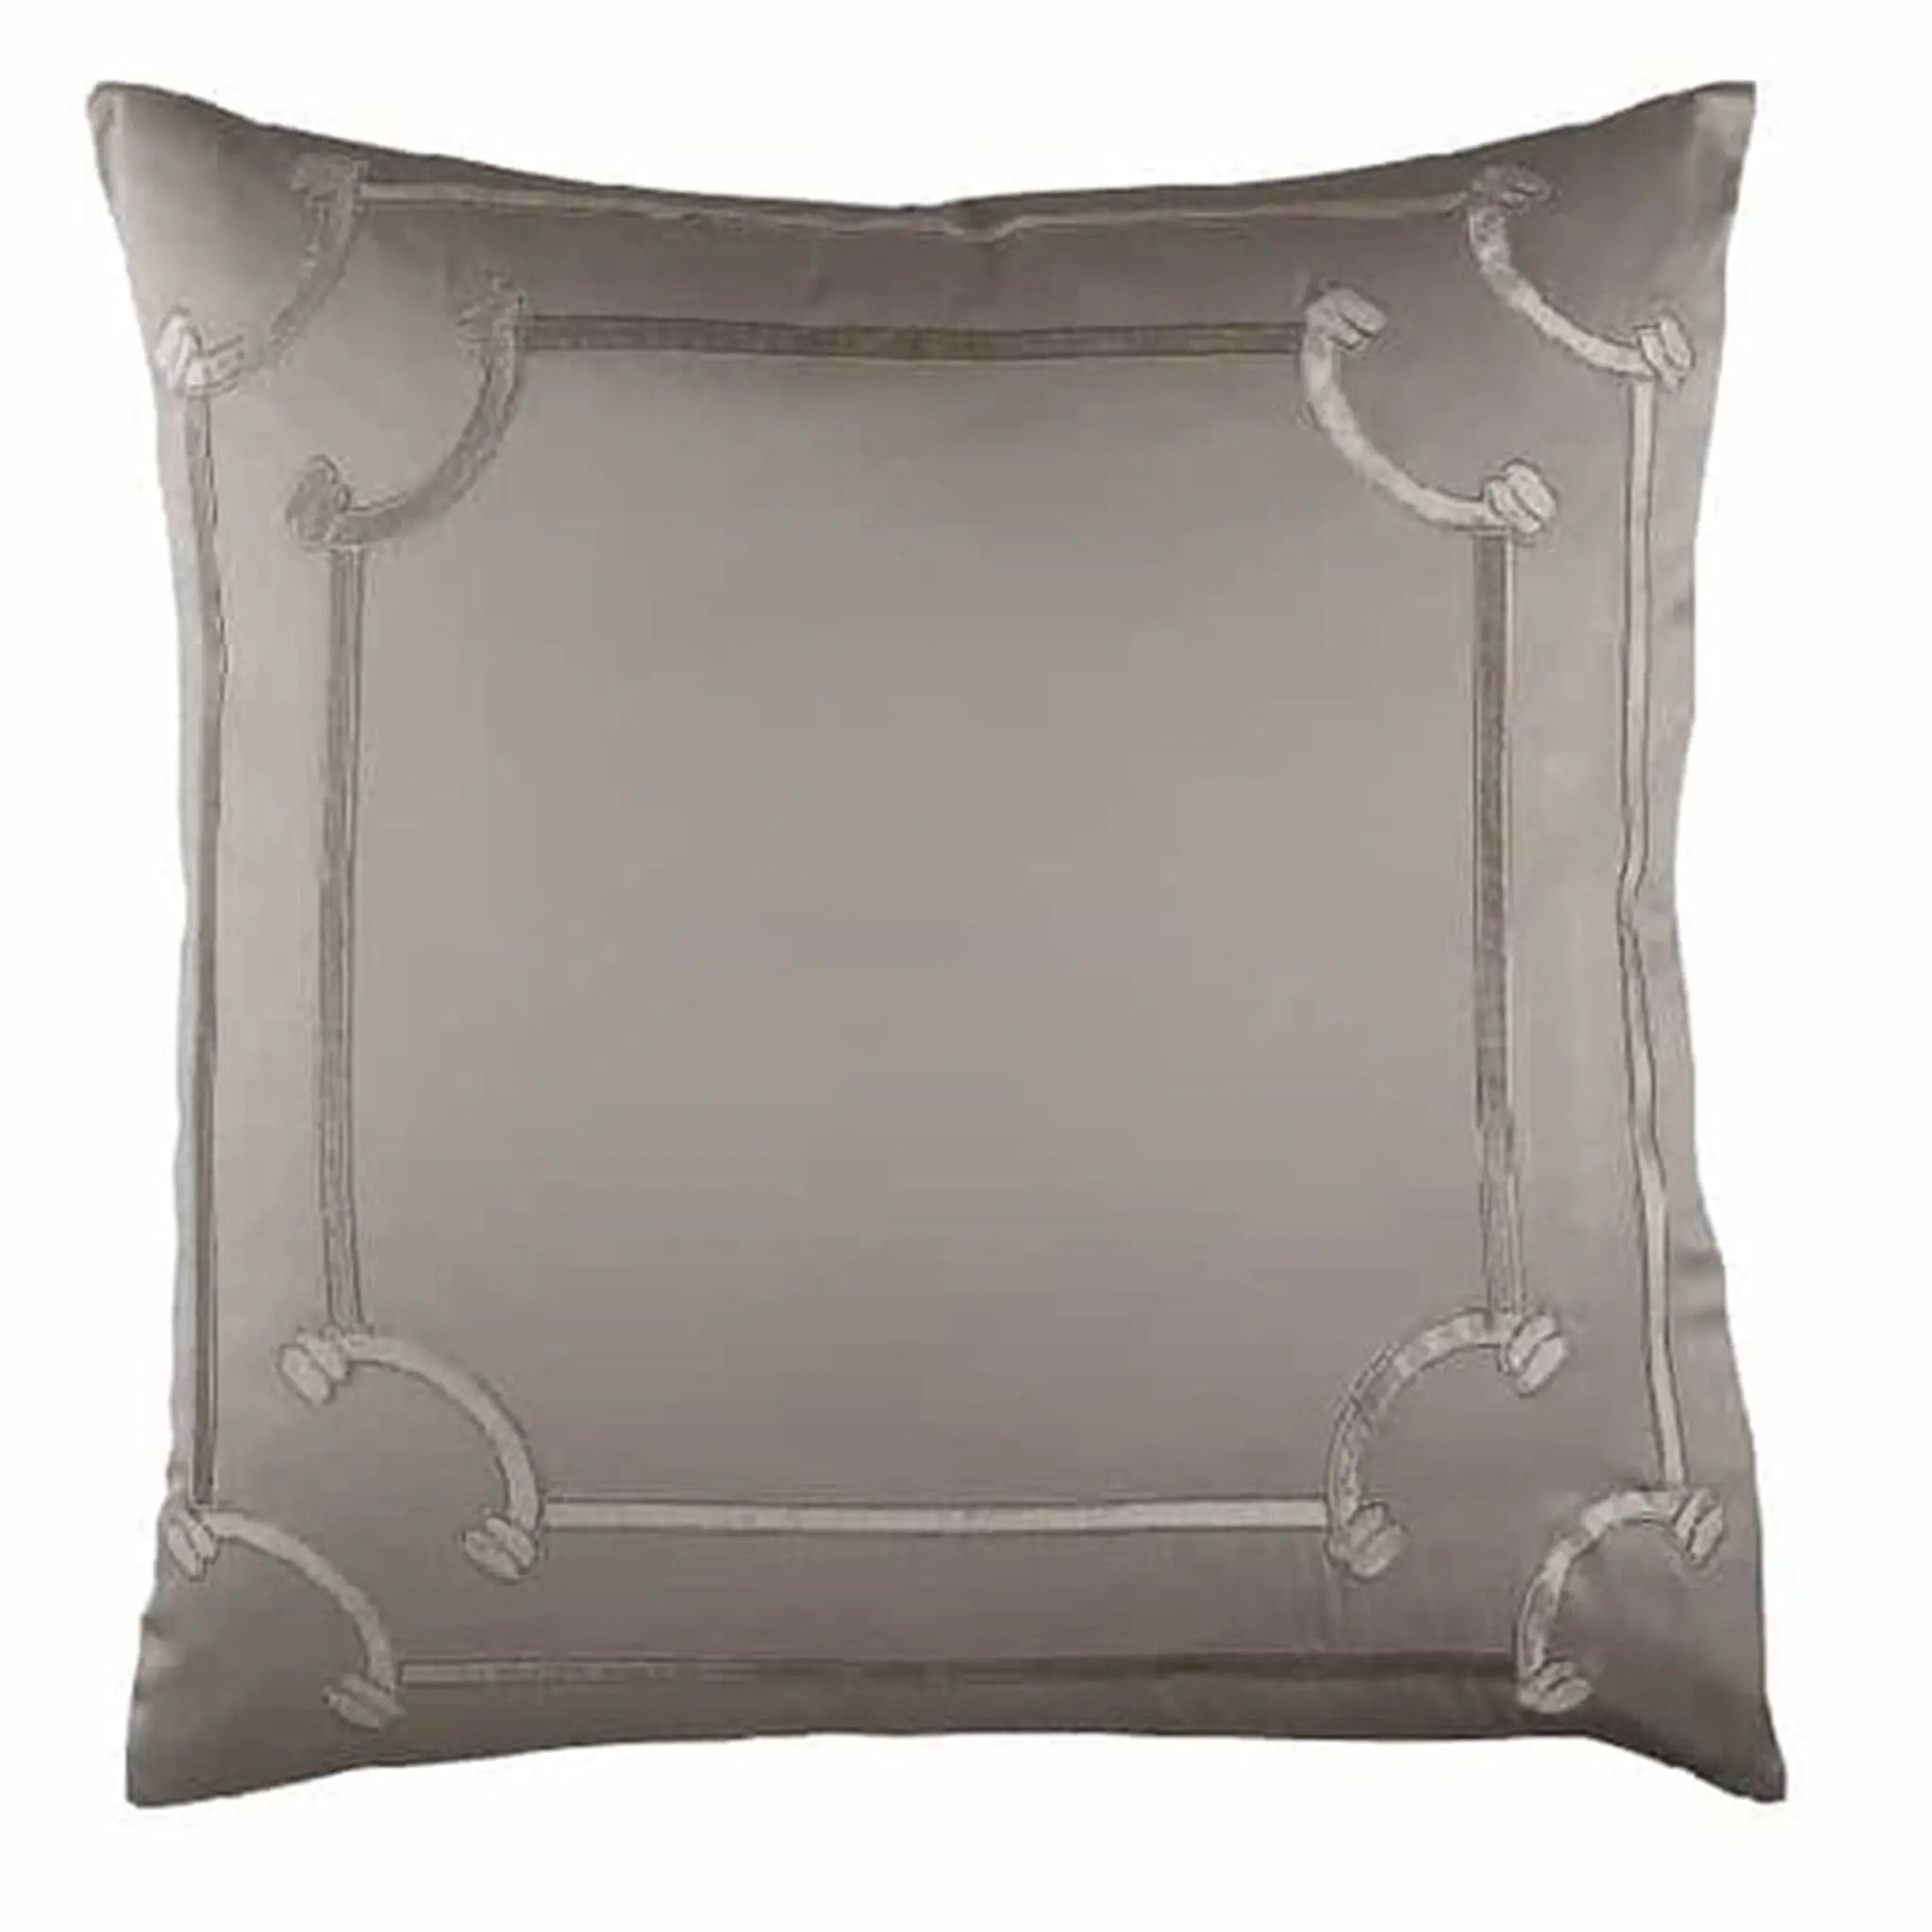 Lili Alessandra Vendome Euro Pillow in Taupe and Fawn